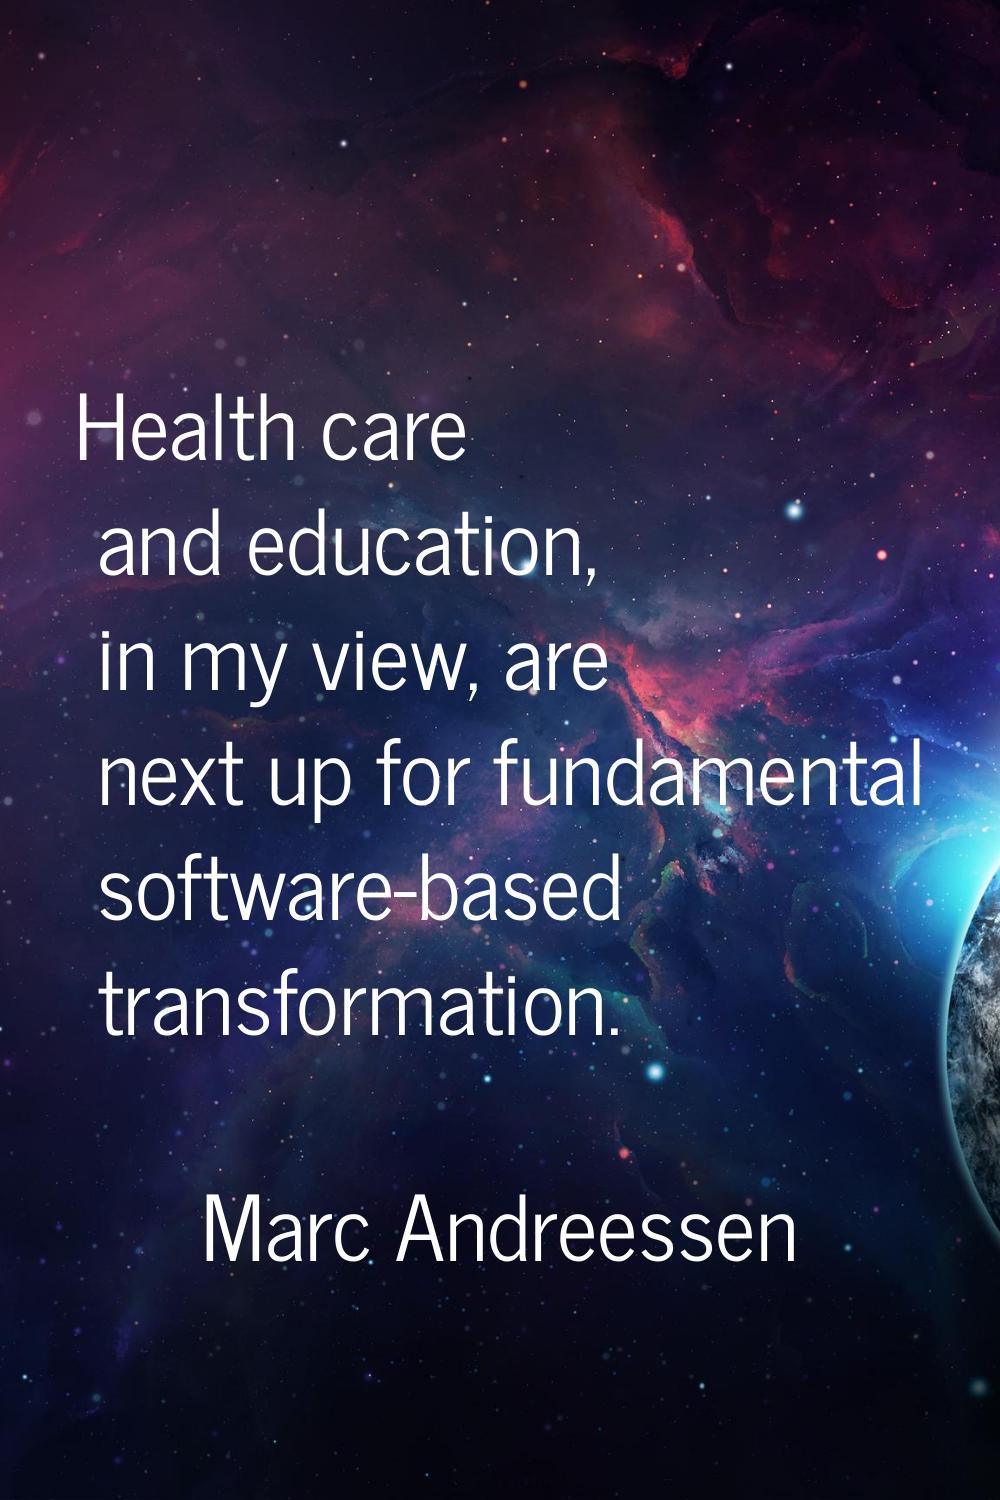 Health care and education, in my view, are next up for fundamental software-based transformation.